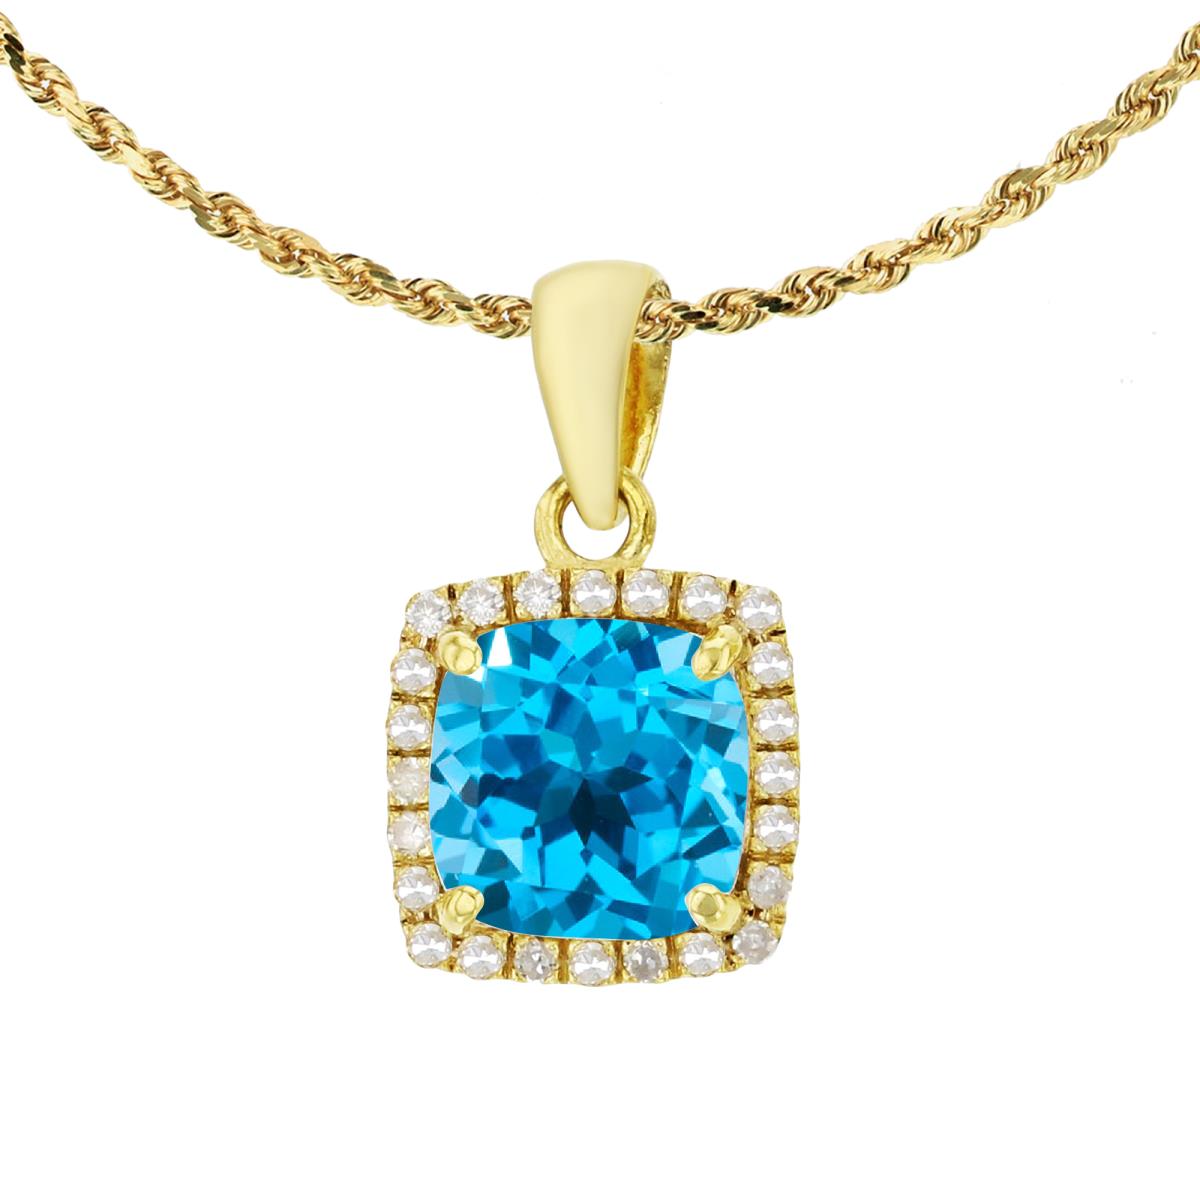 14K Yellow Gold 7mm Cushion Swiss Blue Topaz & 0.12 CTTW Diamond Halo 18" Rope Chain Necklace